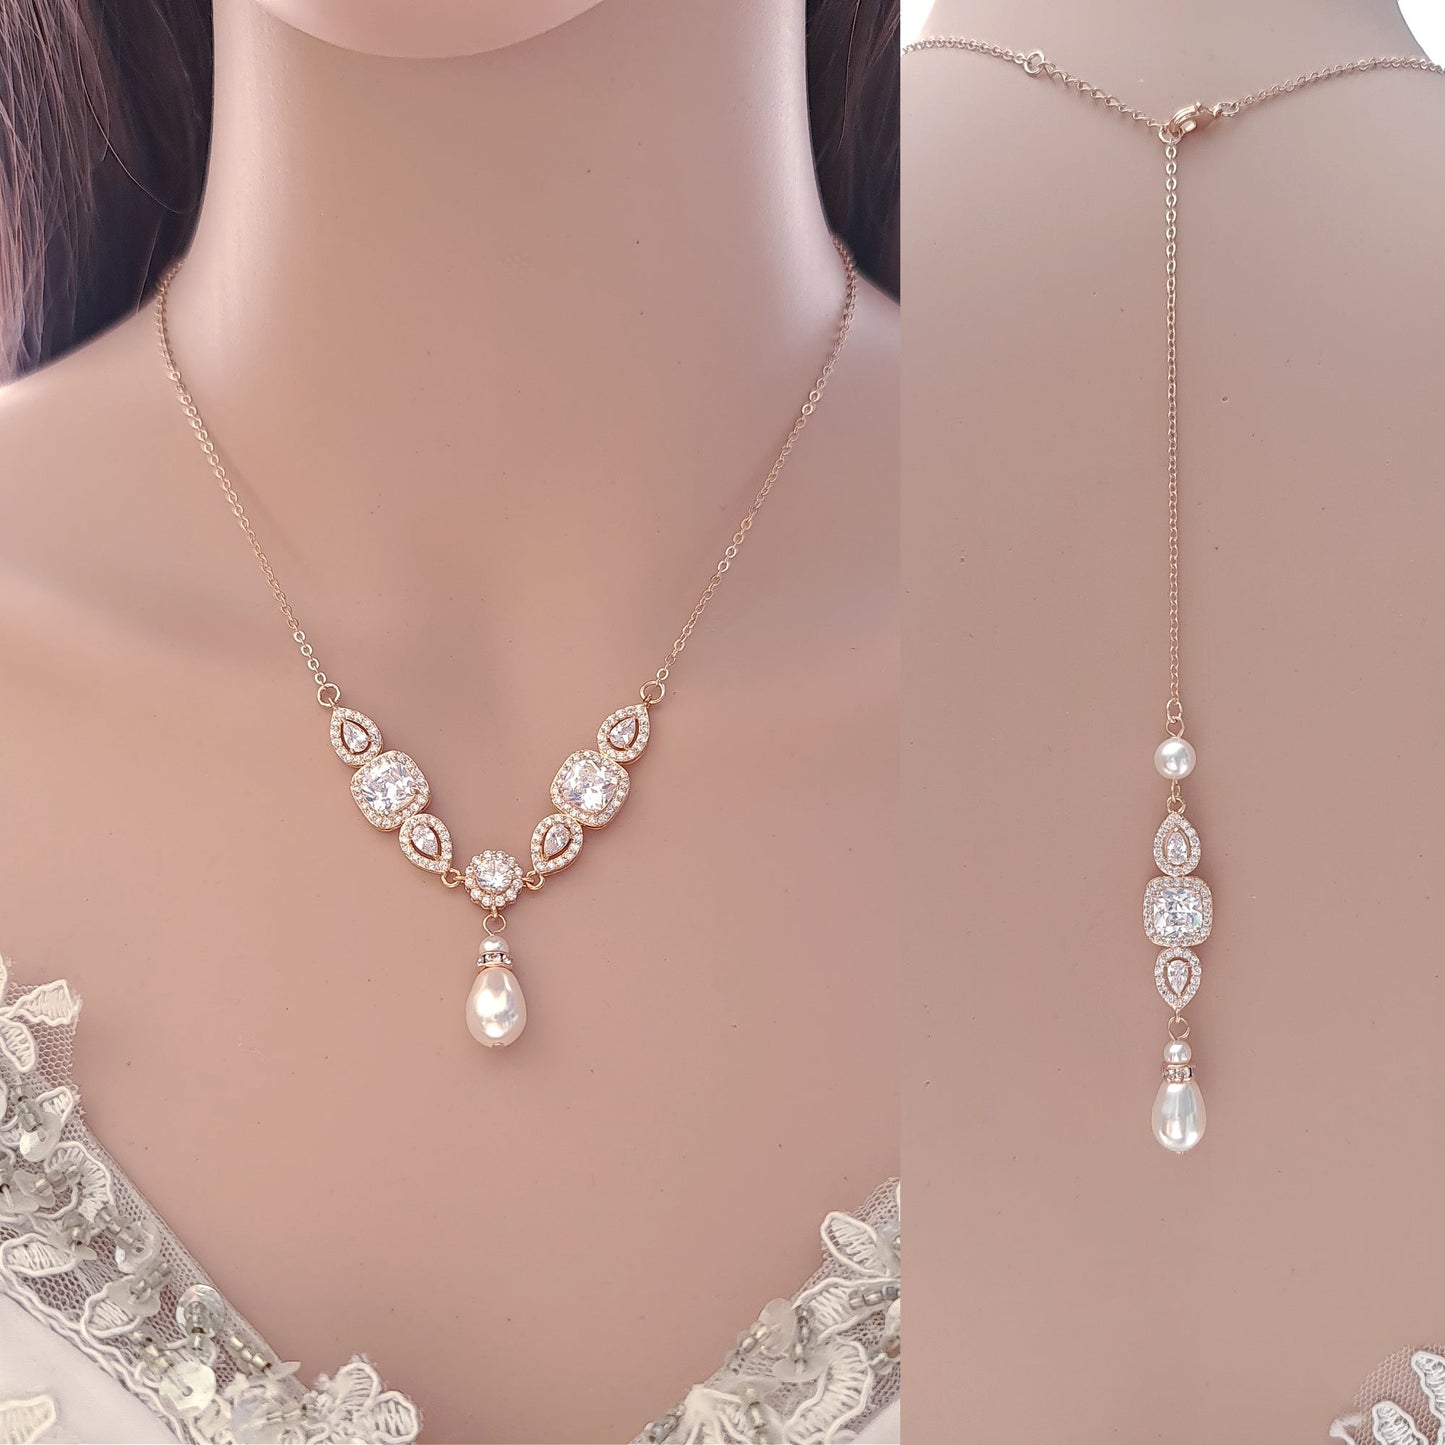 Gold Necklace for Brides with Pearl Drops-Gianna